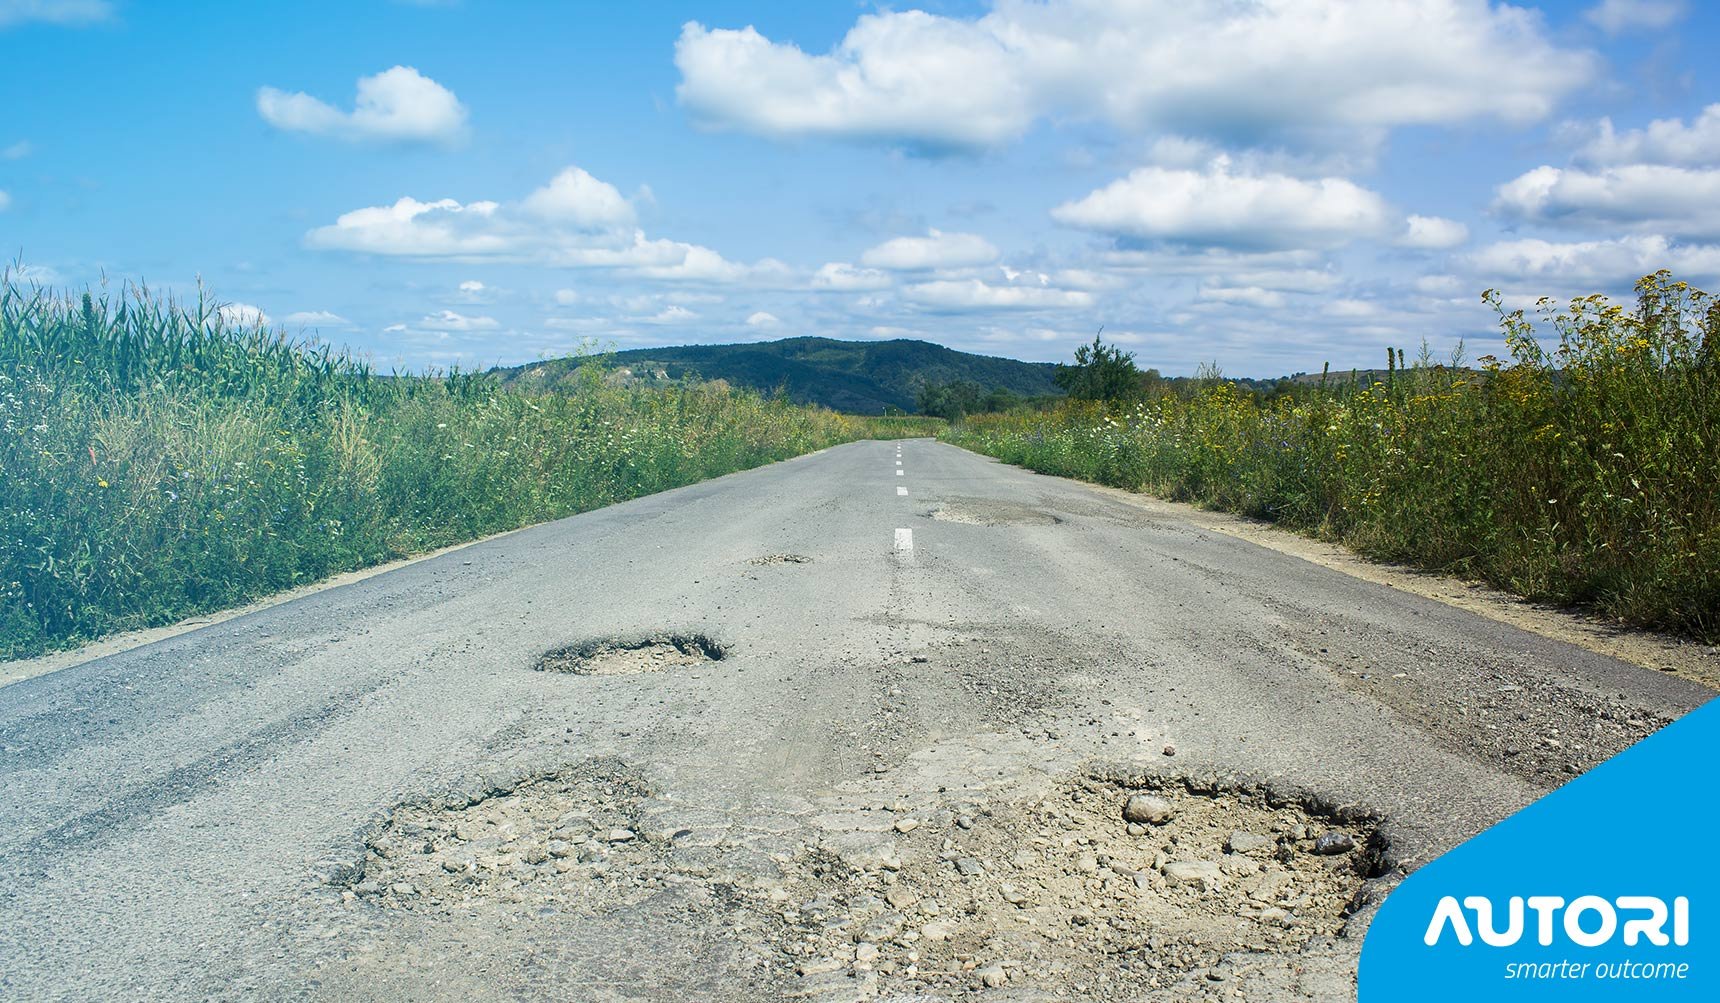 Software-tools-for-road-maintenance-operations-such-as-potholes,-cracks-and-routeplanning-or-infrastructure-maintenance-after-winter